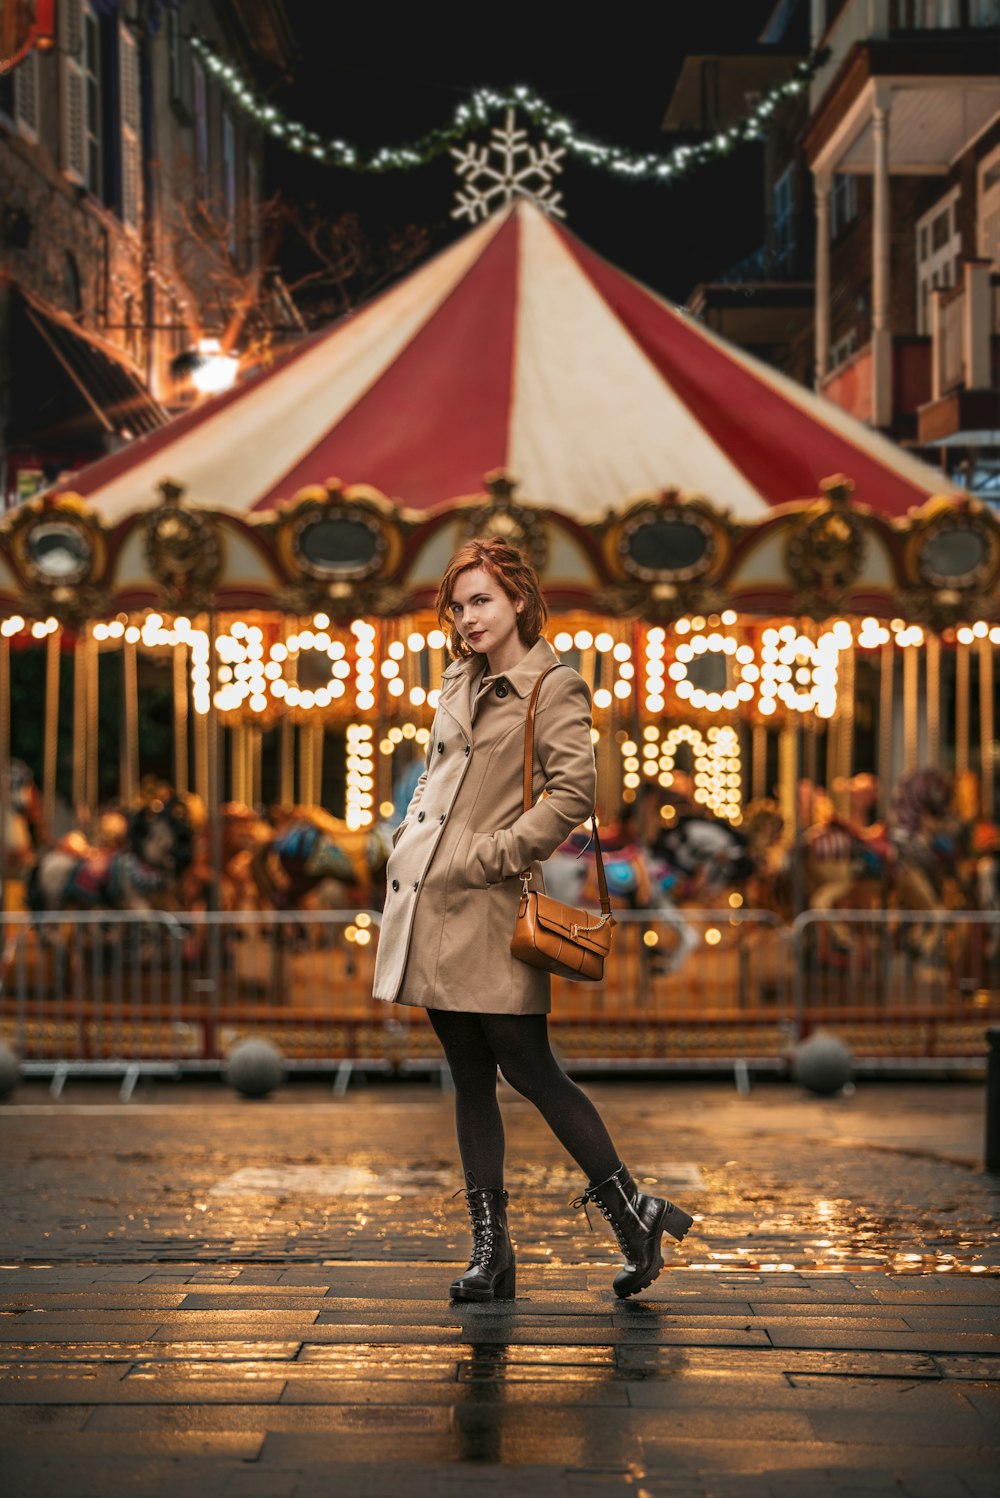 a woman walking down a street in front of a merry - go - round